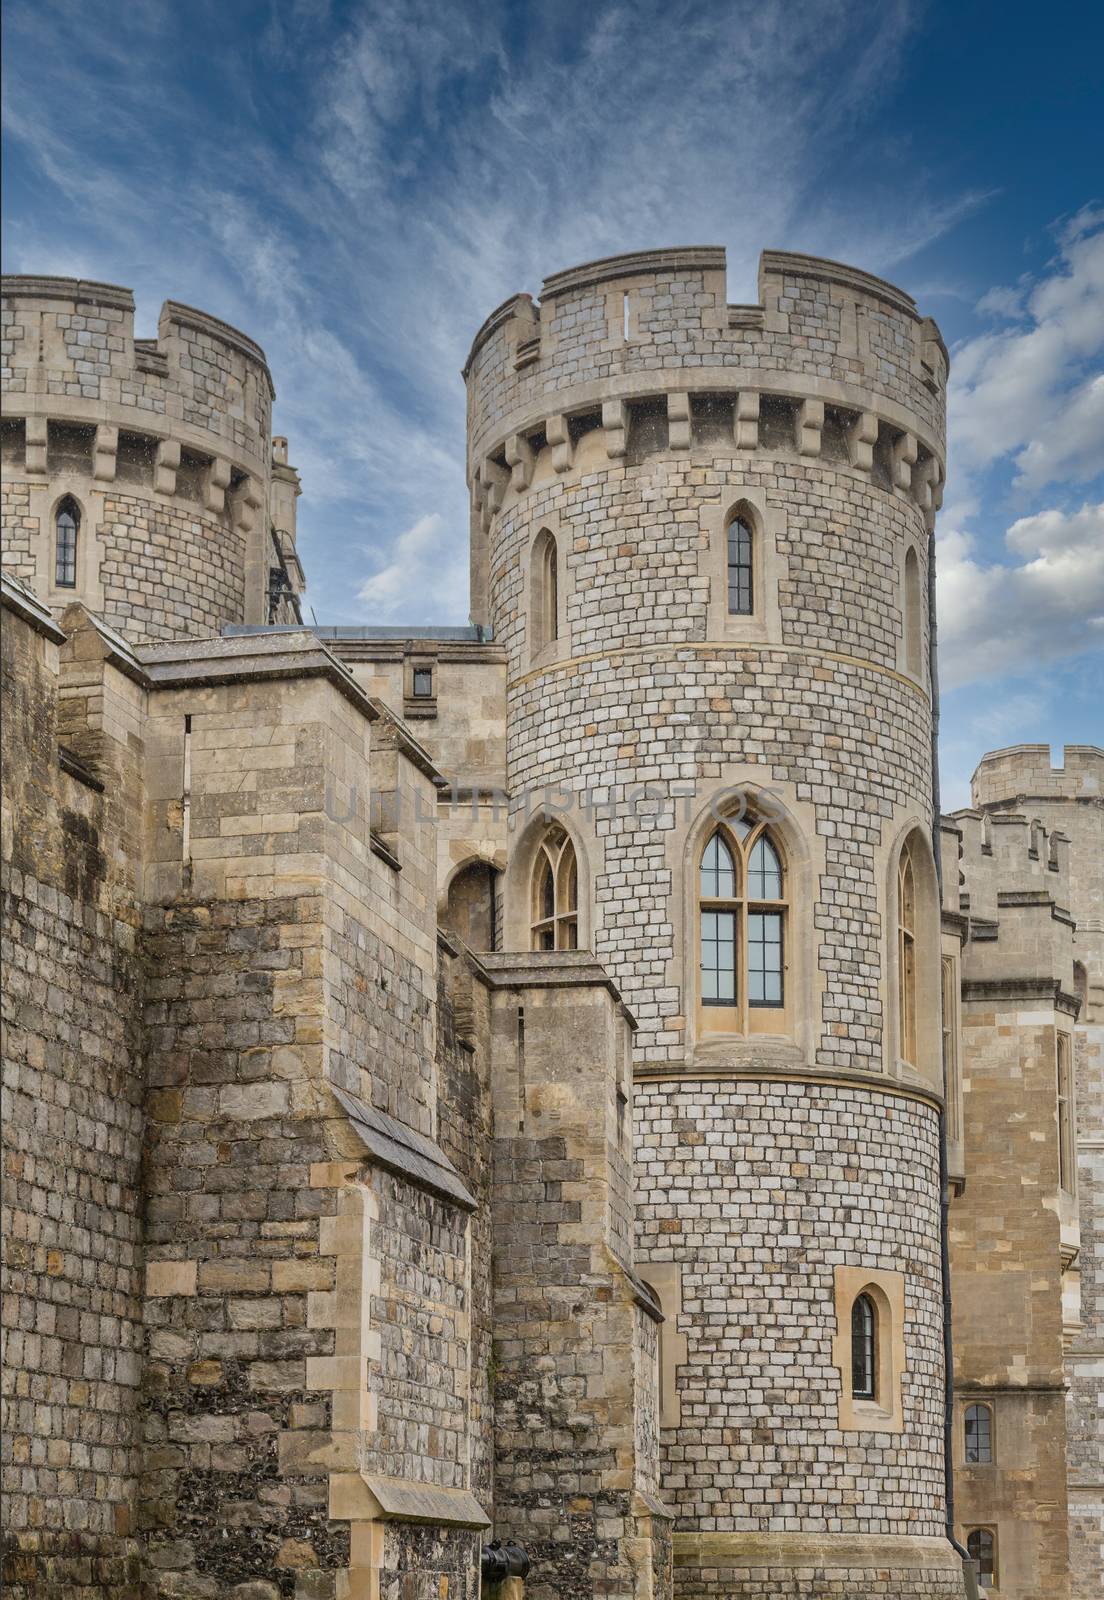 Towers on Windsor Castle by dbvirago